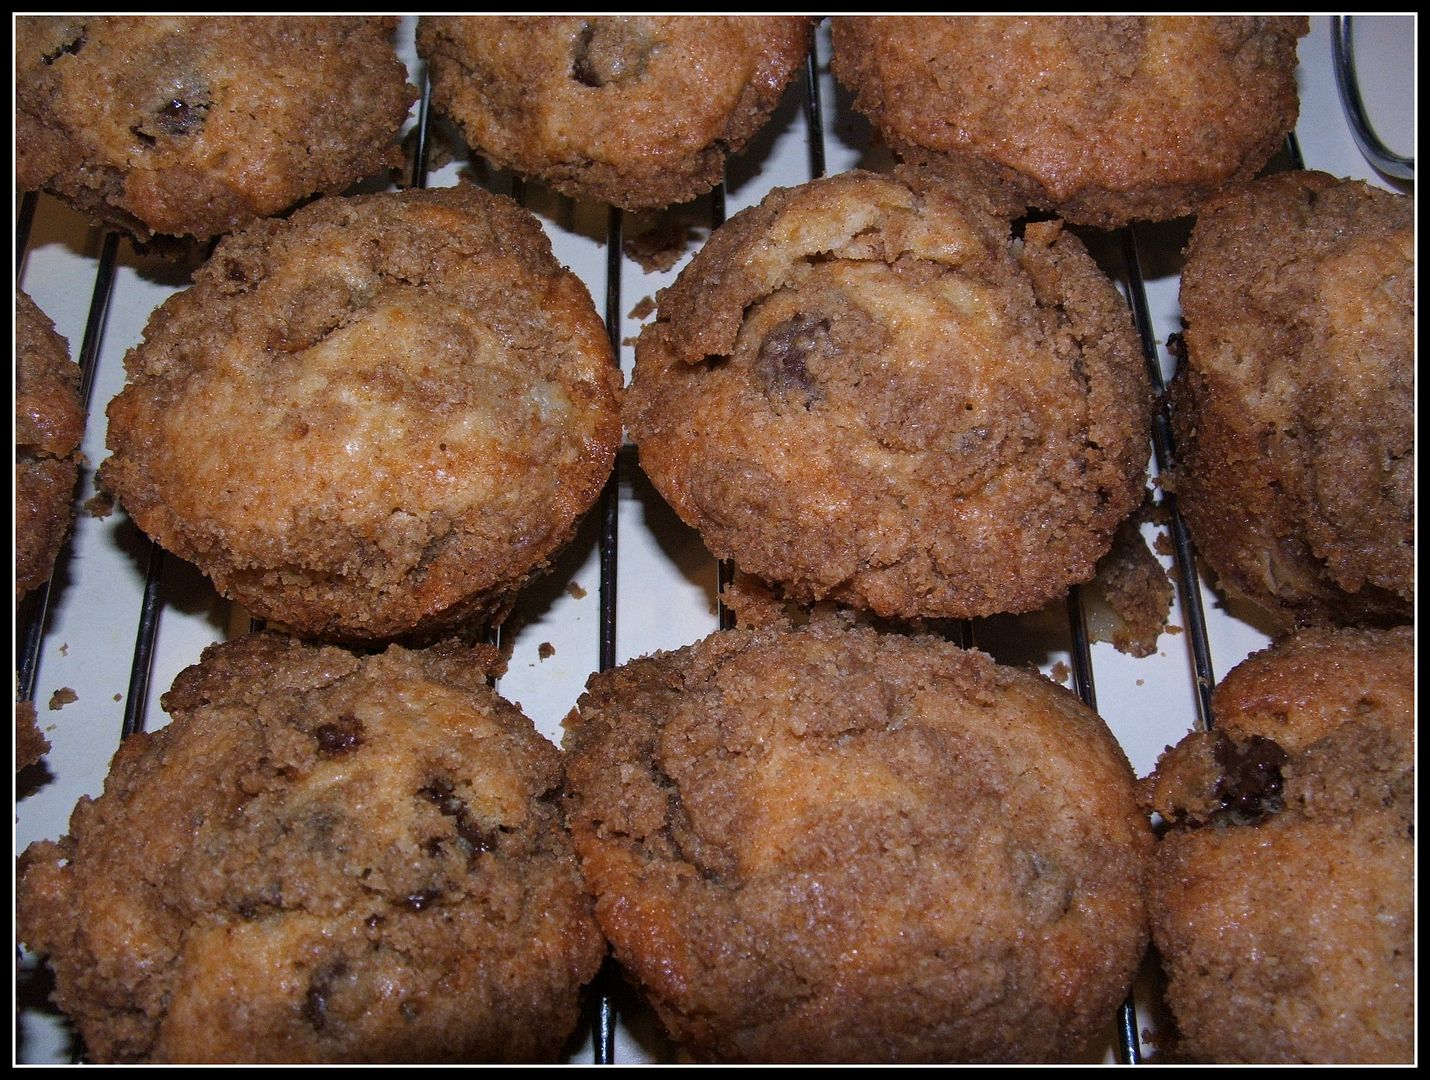 Pear Chocolate Chip Muffins by Angie Ouellette-Tower for godsgrowinggarden.com photo 006_zpse2a9e461.jpg